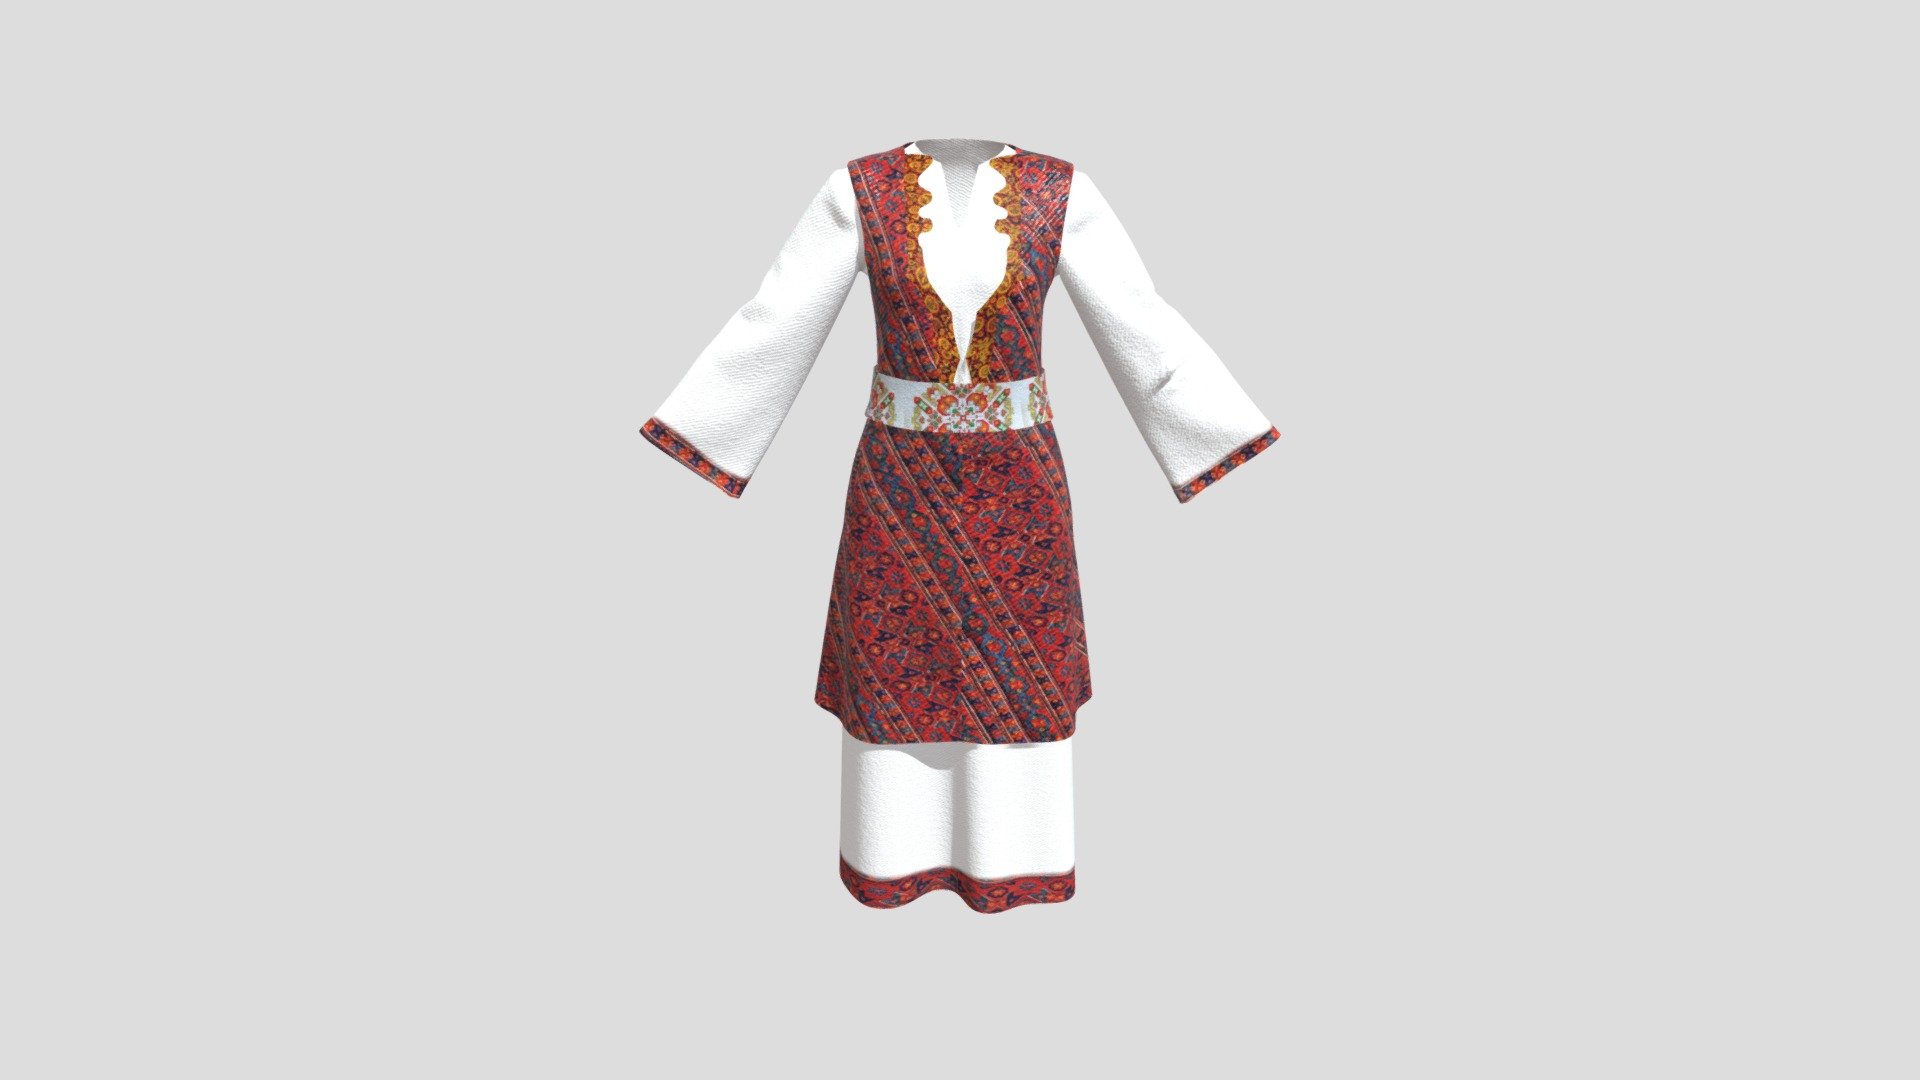 I created this traditional slavic clothes in marvelous designer and textured in substance painter 3d model